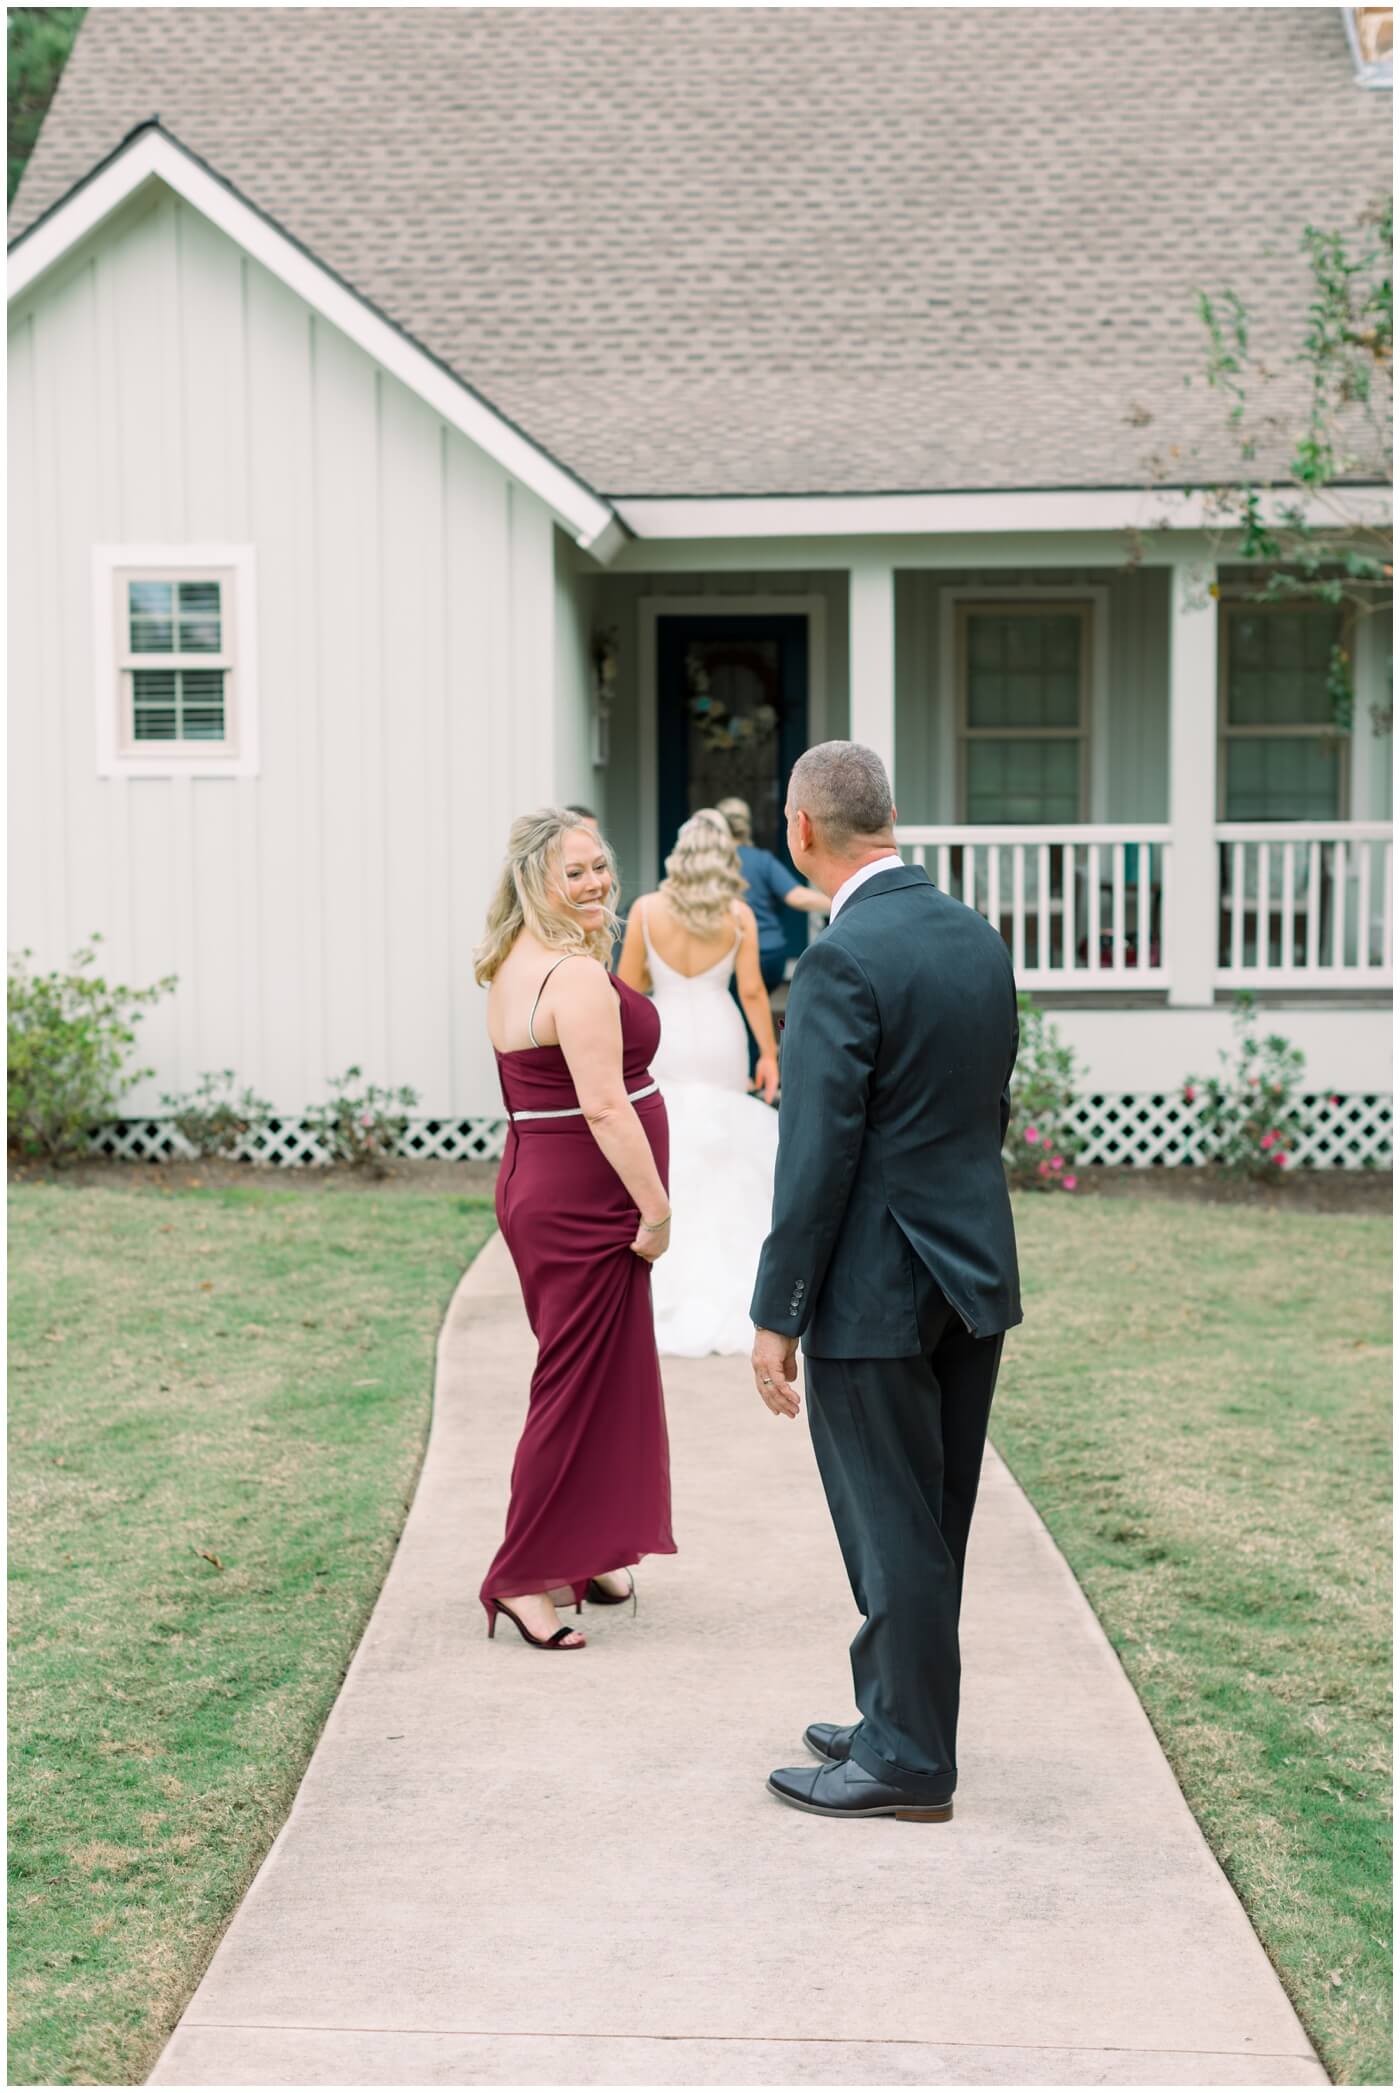 Houston Wedding at The Vine | the bride's parents looking at each other and smiling